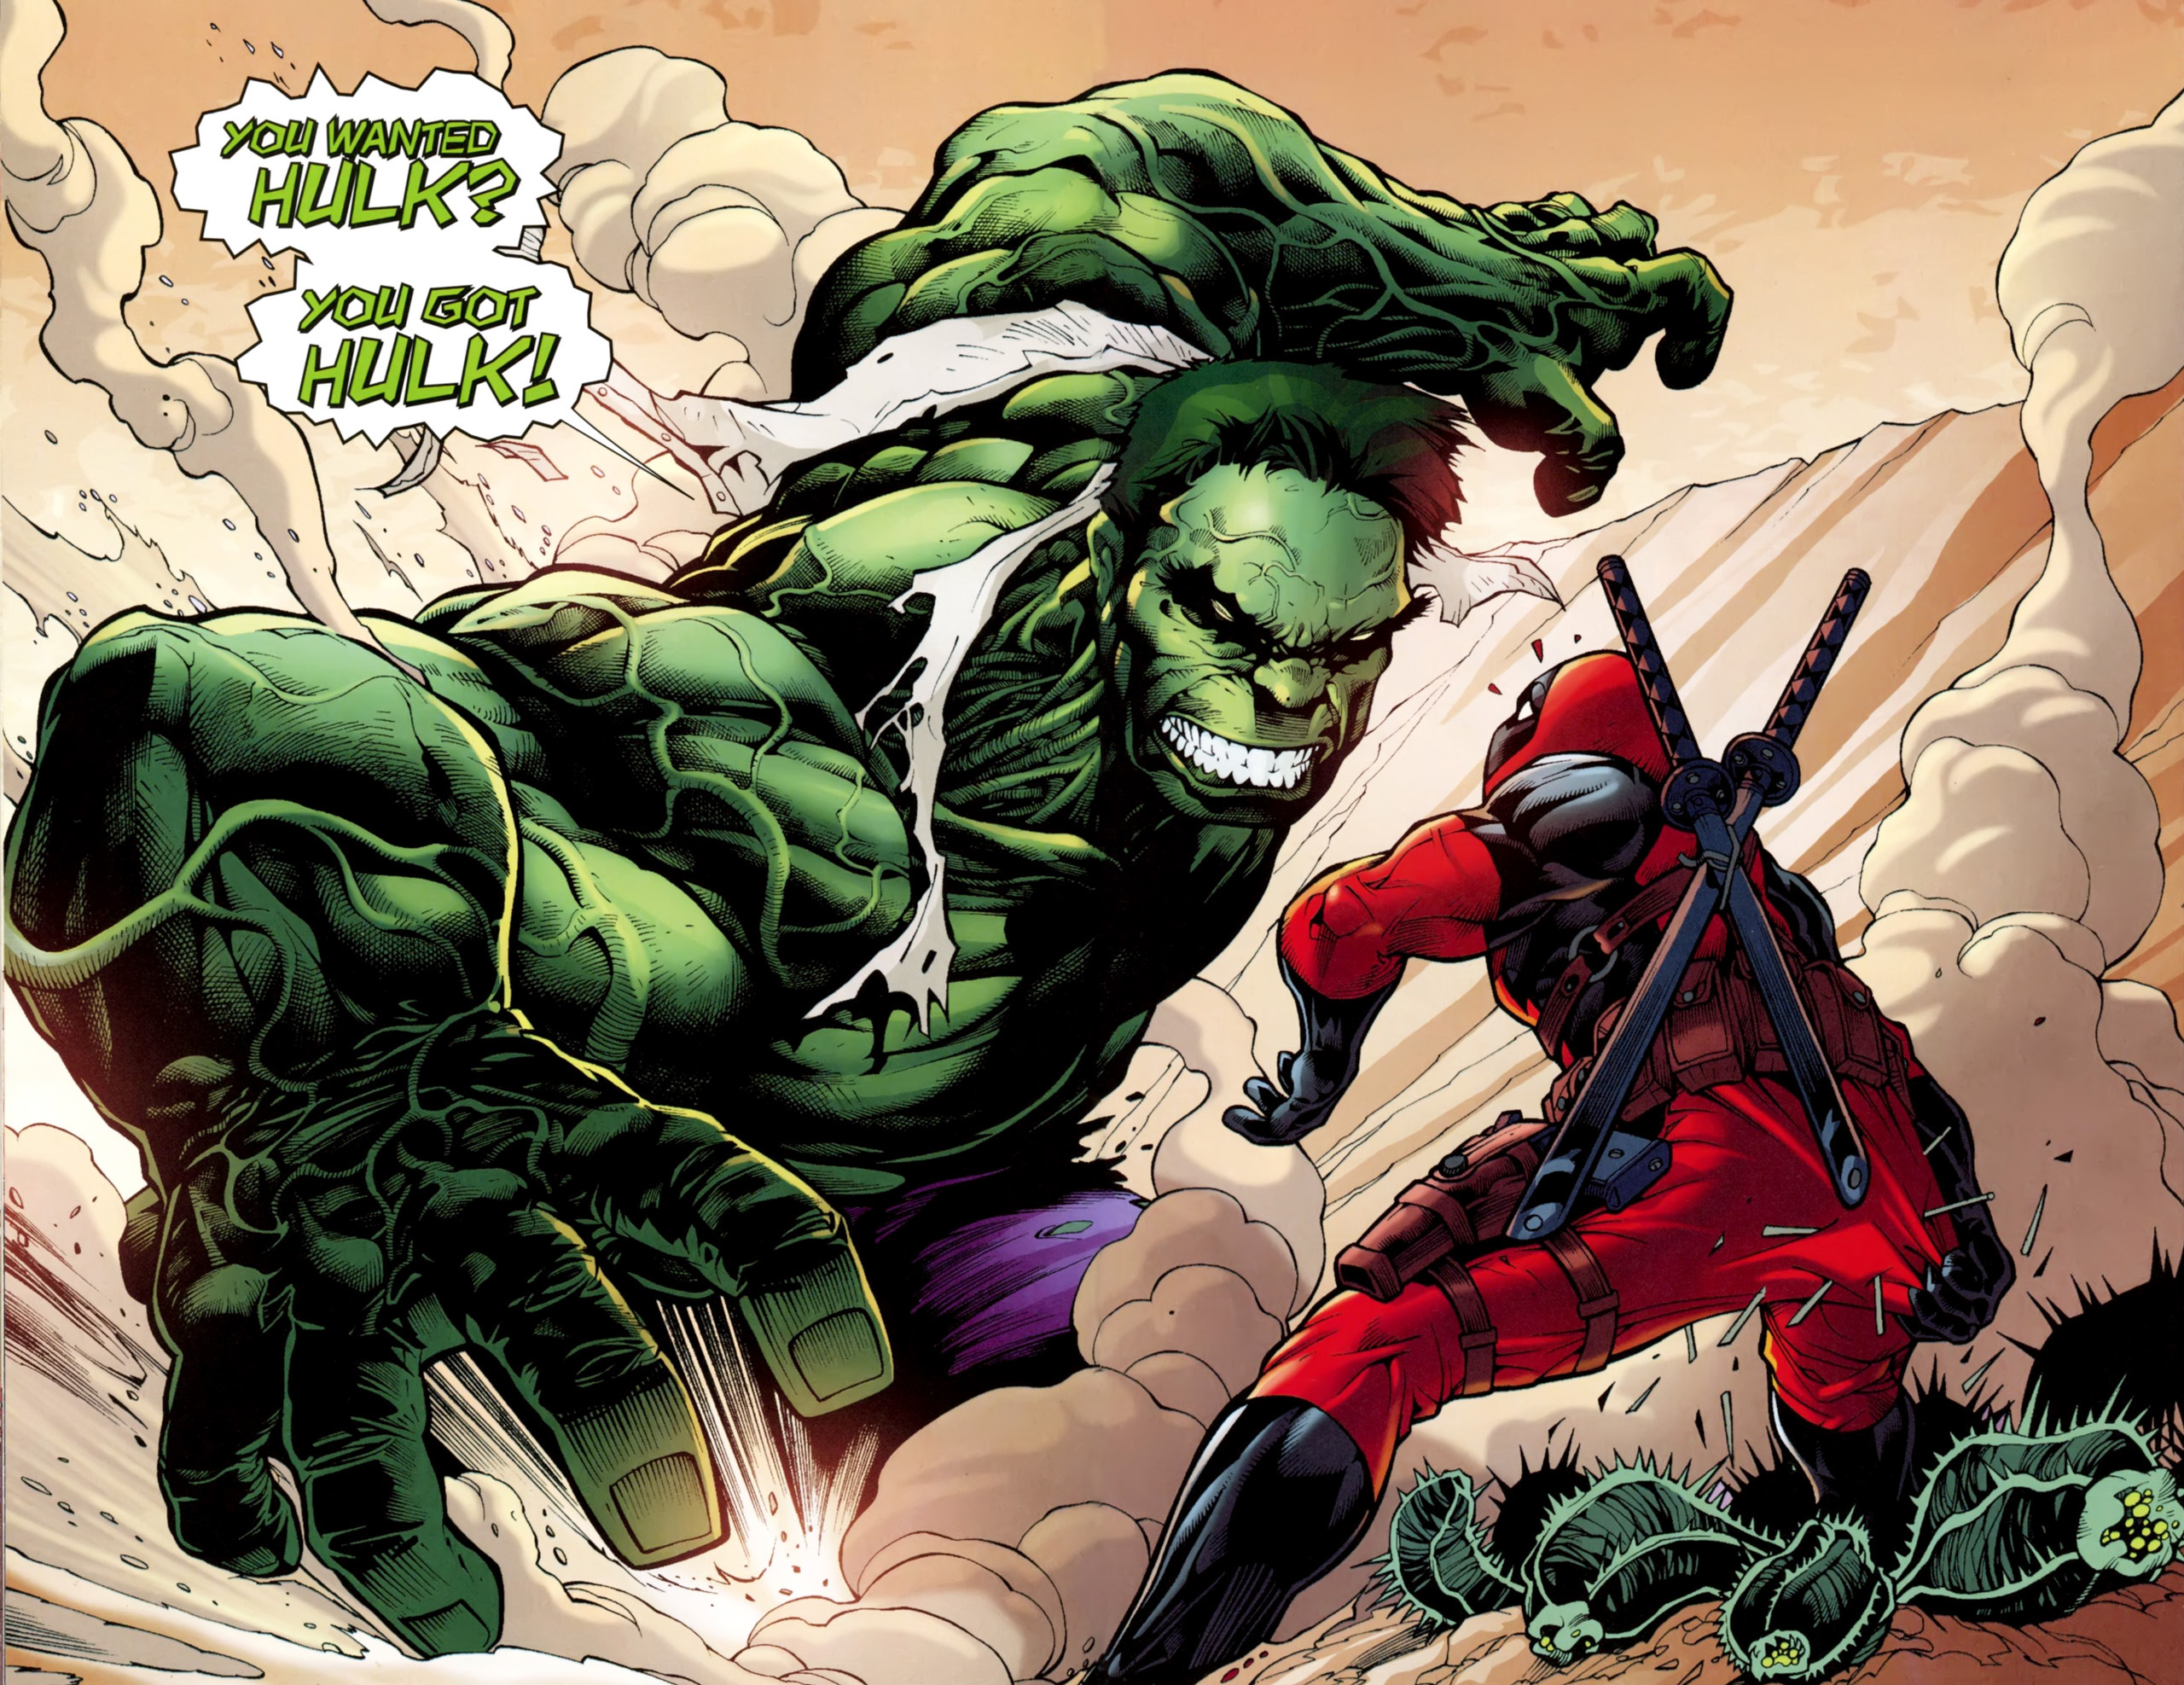 Deadpool vs. hulk HD Wallpapers and Backgrounds